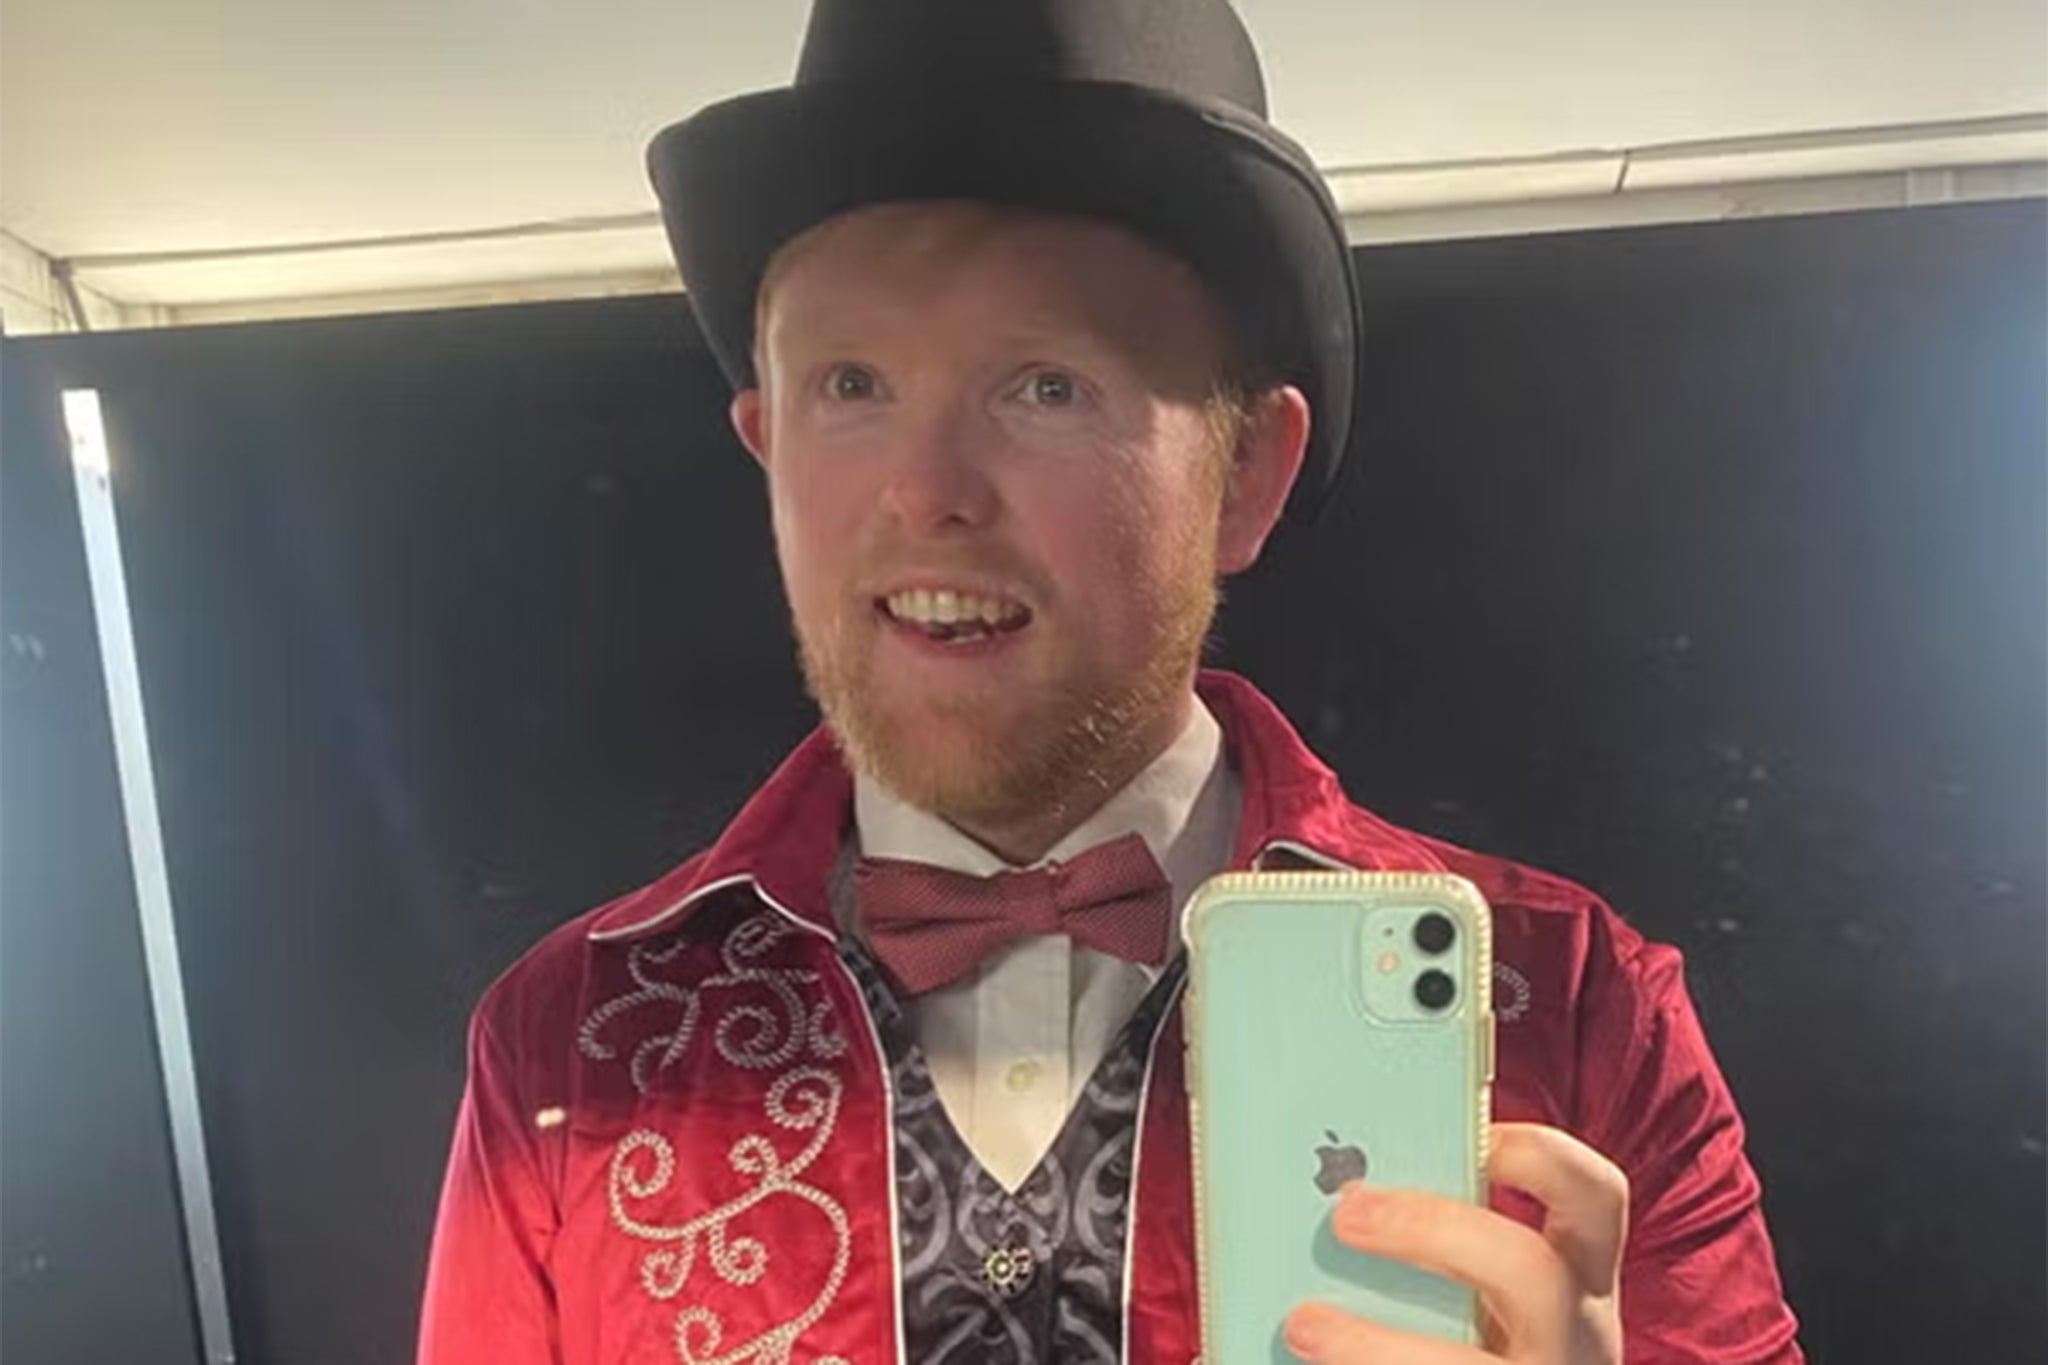 A stand-up comedian hired to play Willy Wonka, Paul Connell, at the widely criticised chocolate factory experience spoke to The Independent about how the chaos unfolded